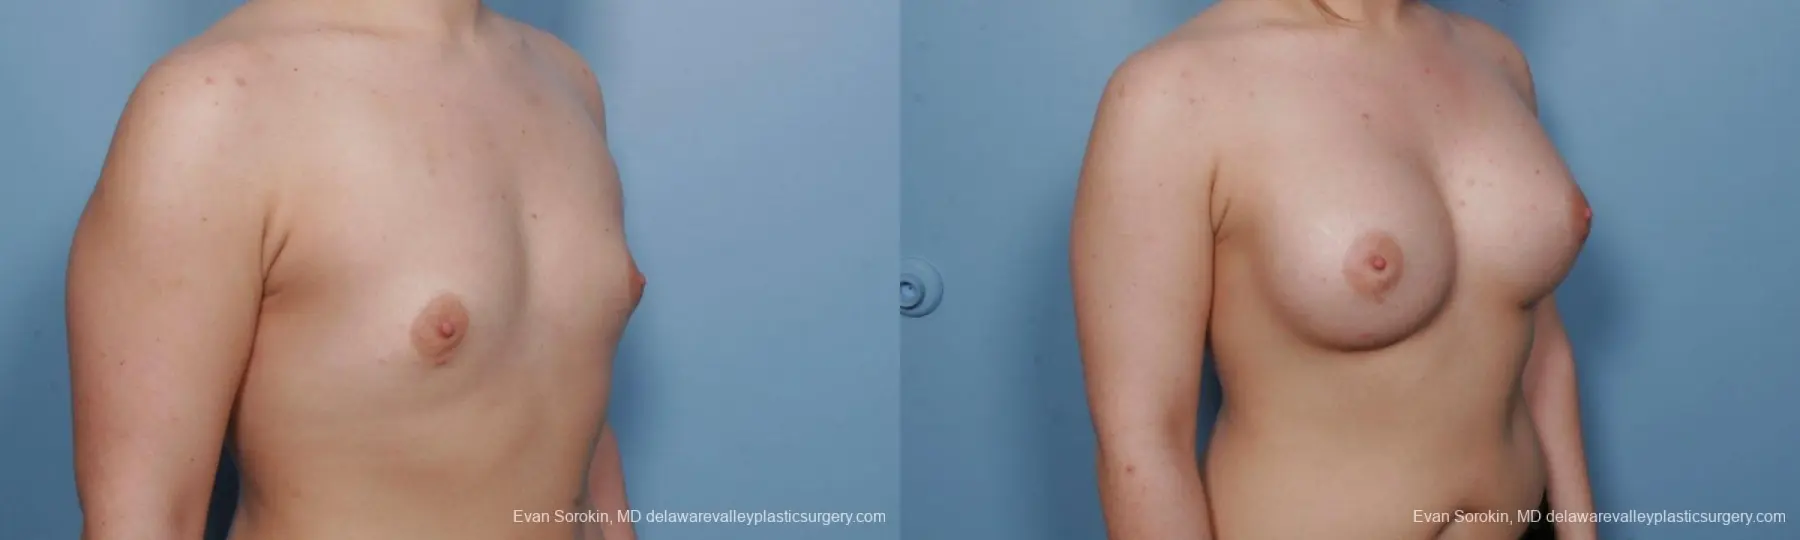 Philadelphia Breast Augmentation 9378 - Before and After 2